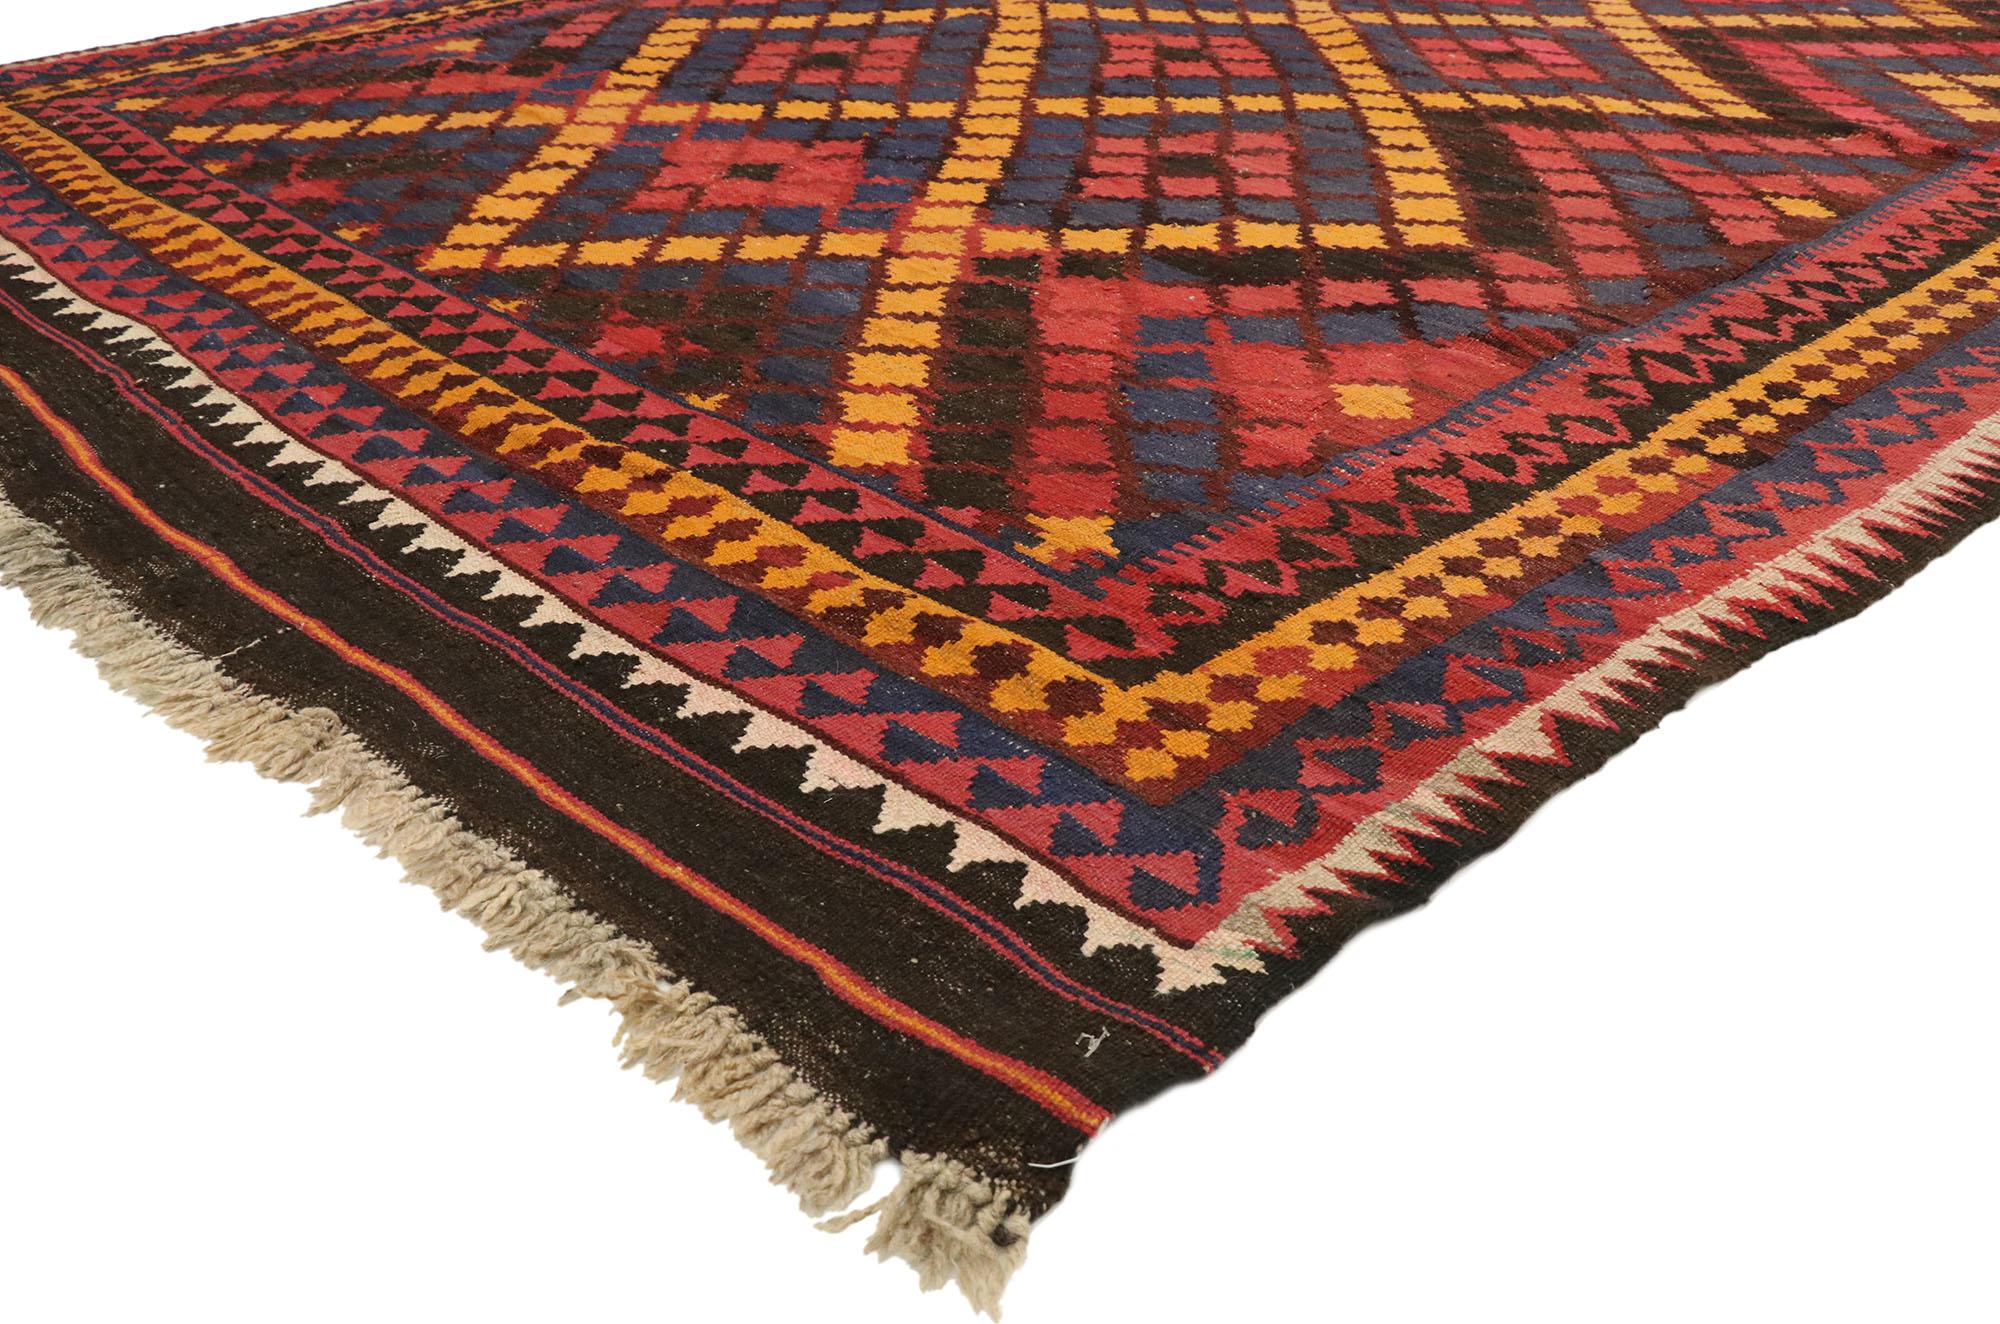 72255, vintage Afghan Ghalmouri Maimana Kilim rug with Pacific Northwest Tribal style. Down-to-earth vibes and rustic sensibility meet Modern Pacific Northwest Tribal style in this handwoven wool vintage Afghan Ghalmouri Maimana Kilim rug. The